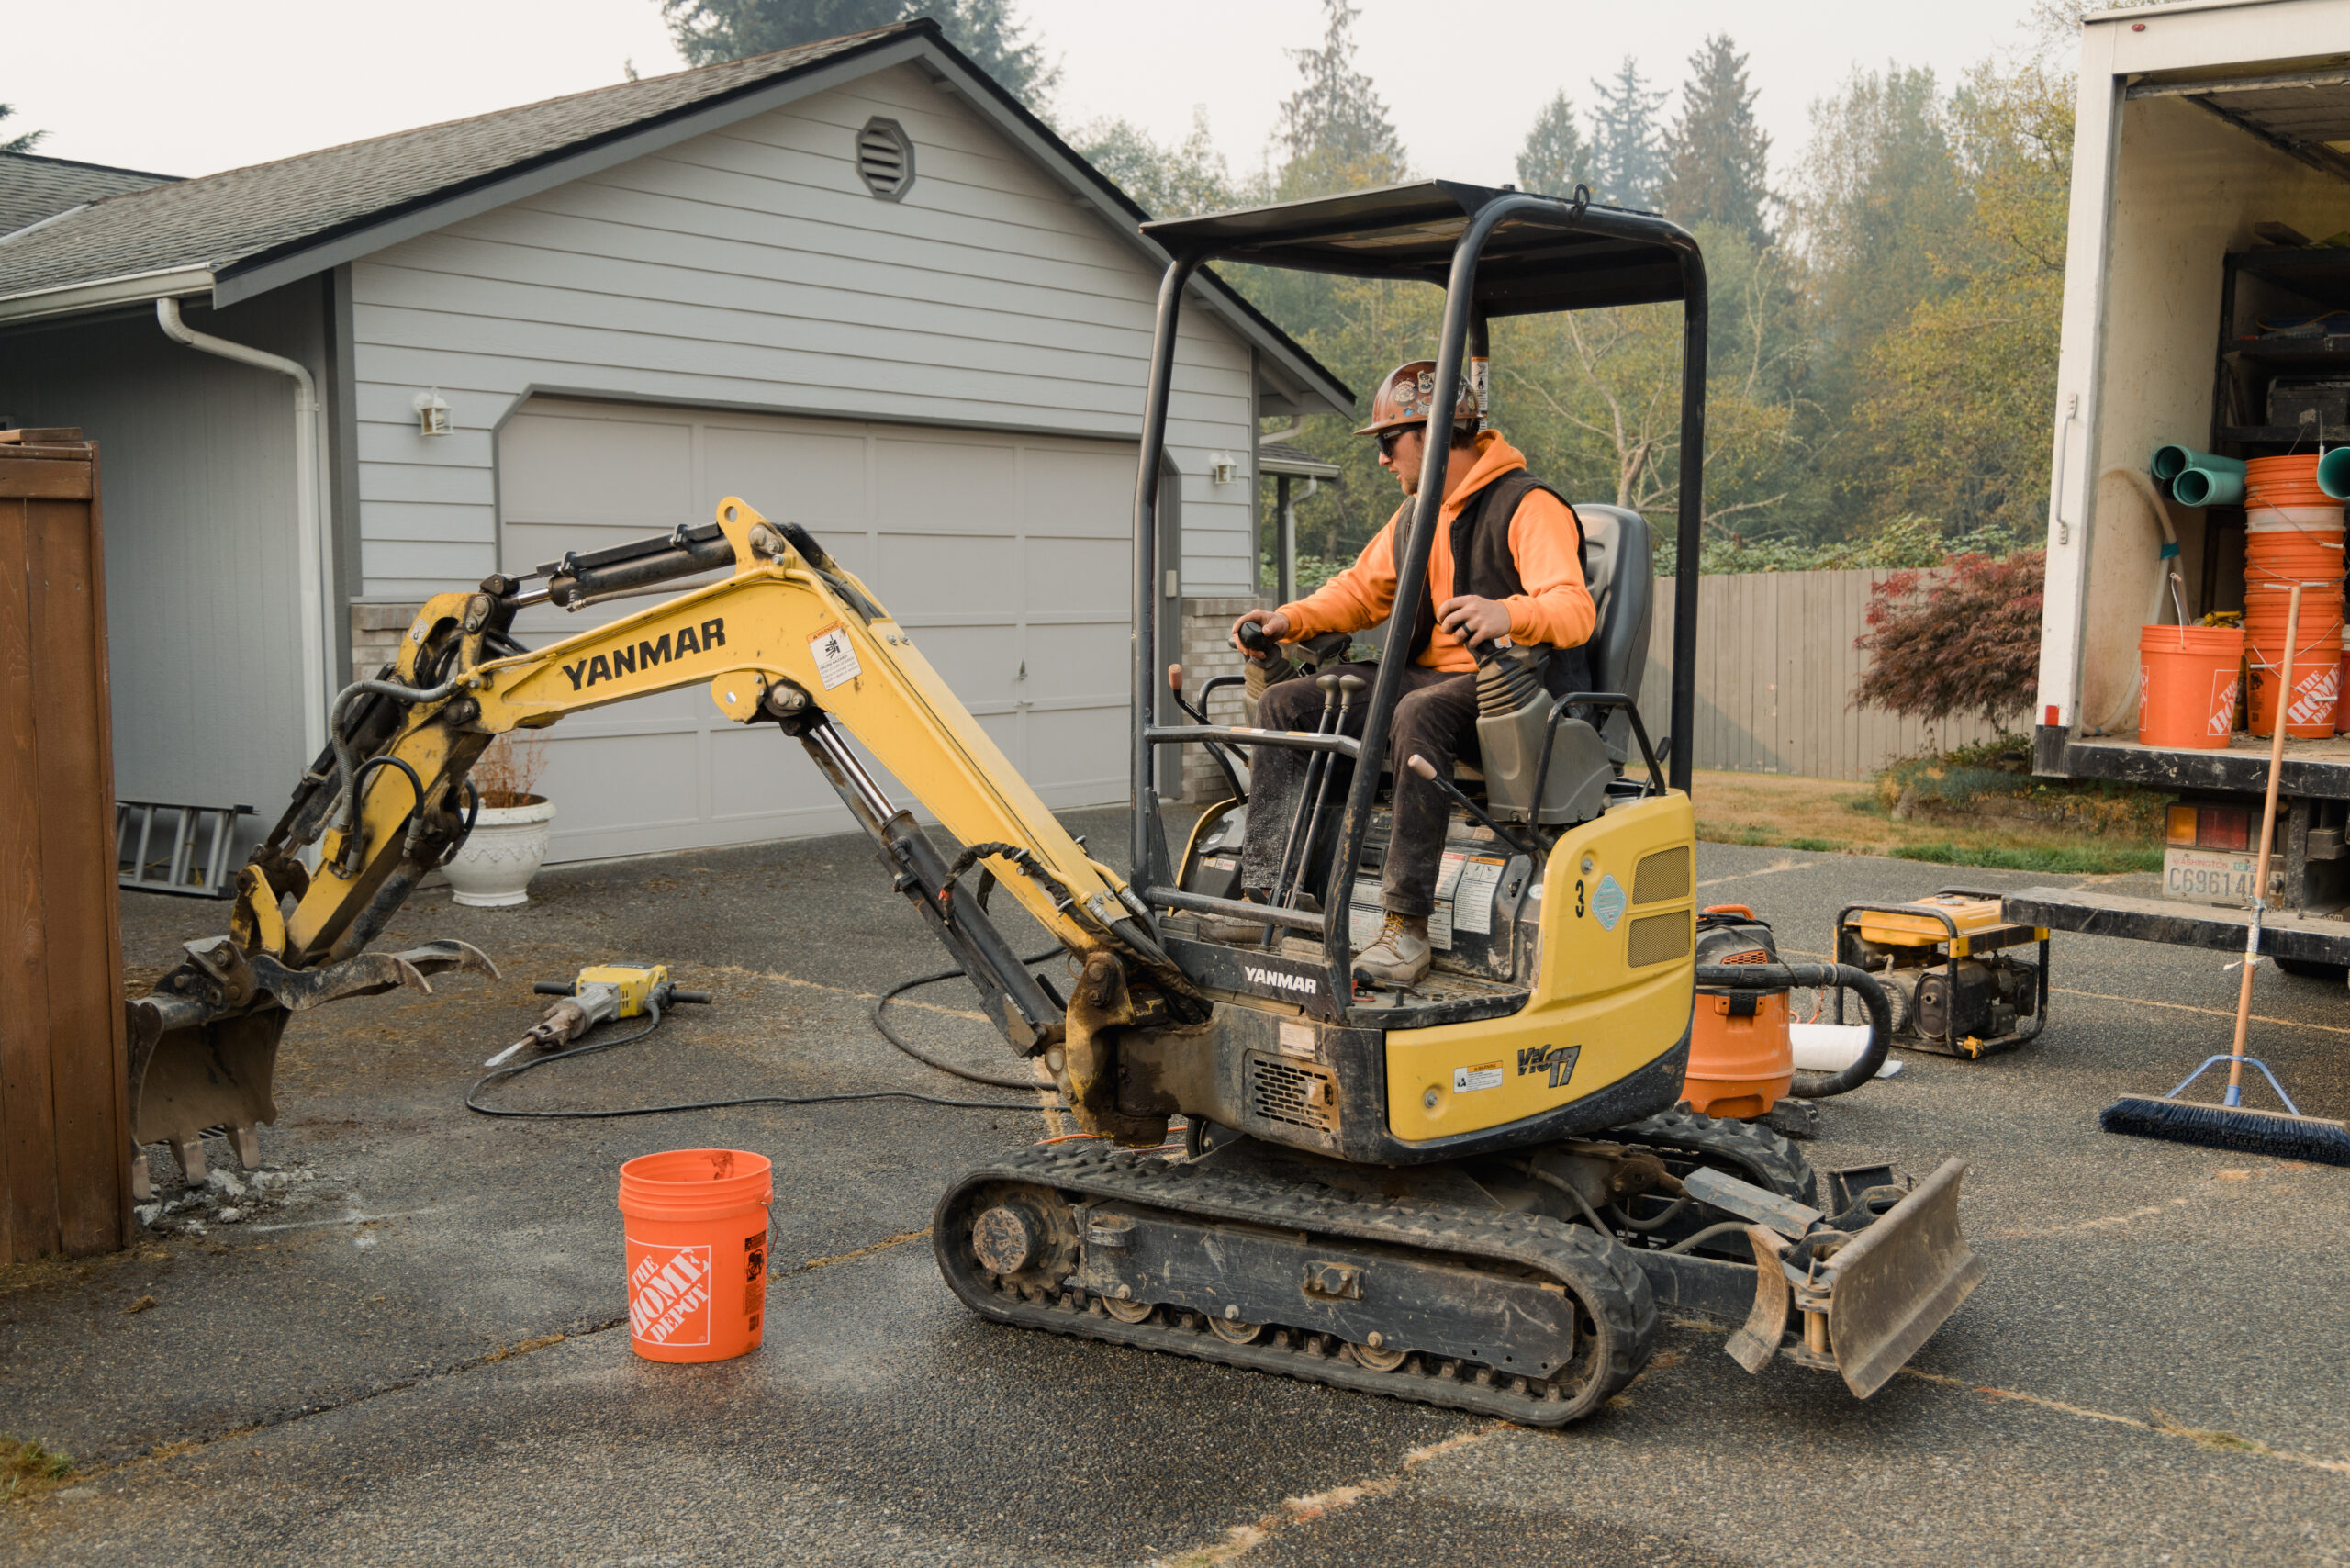 A PRICOR professional uses an excavator to prepare a site for right of way restoration in Seattle, WA.